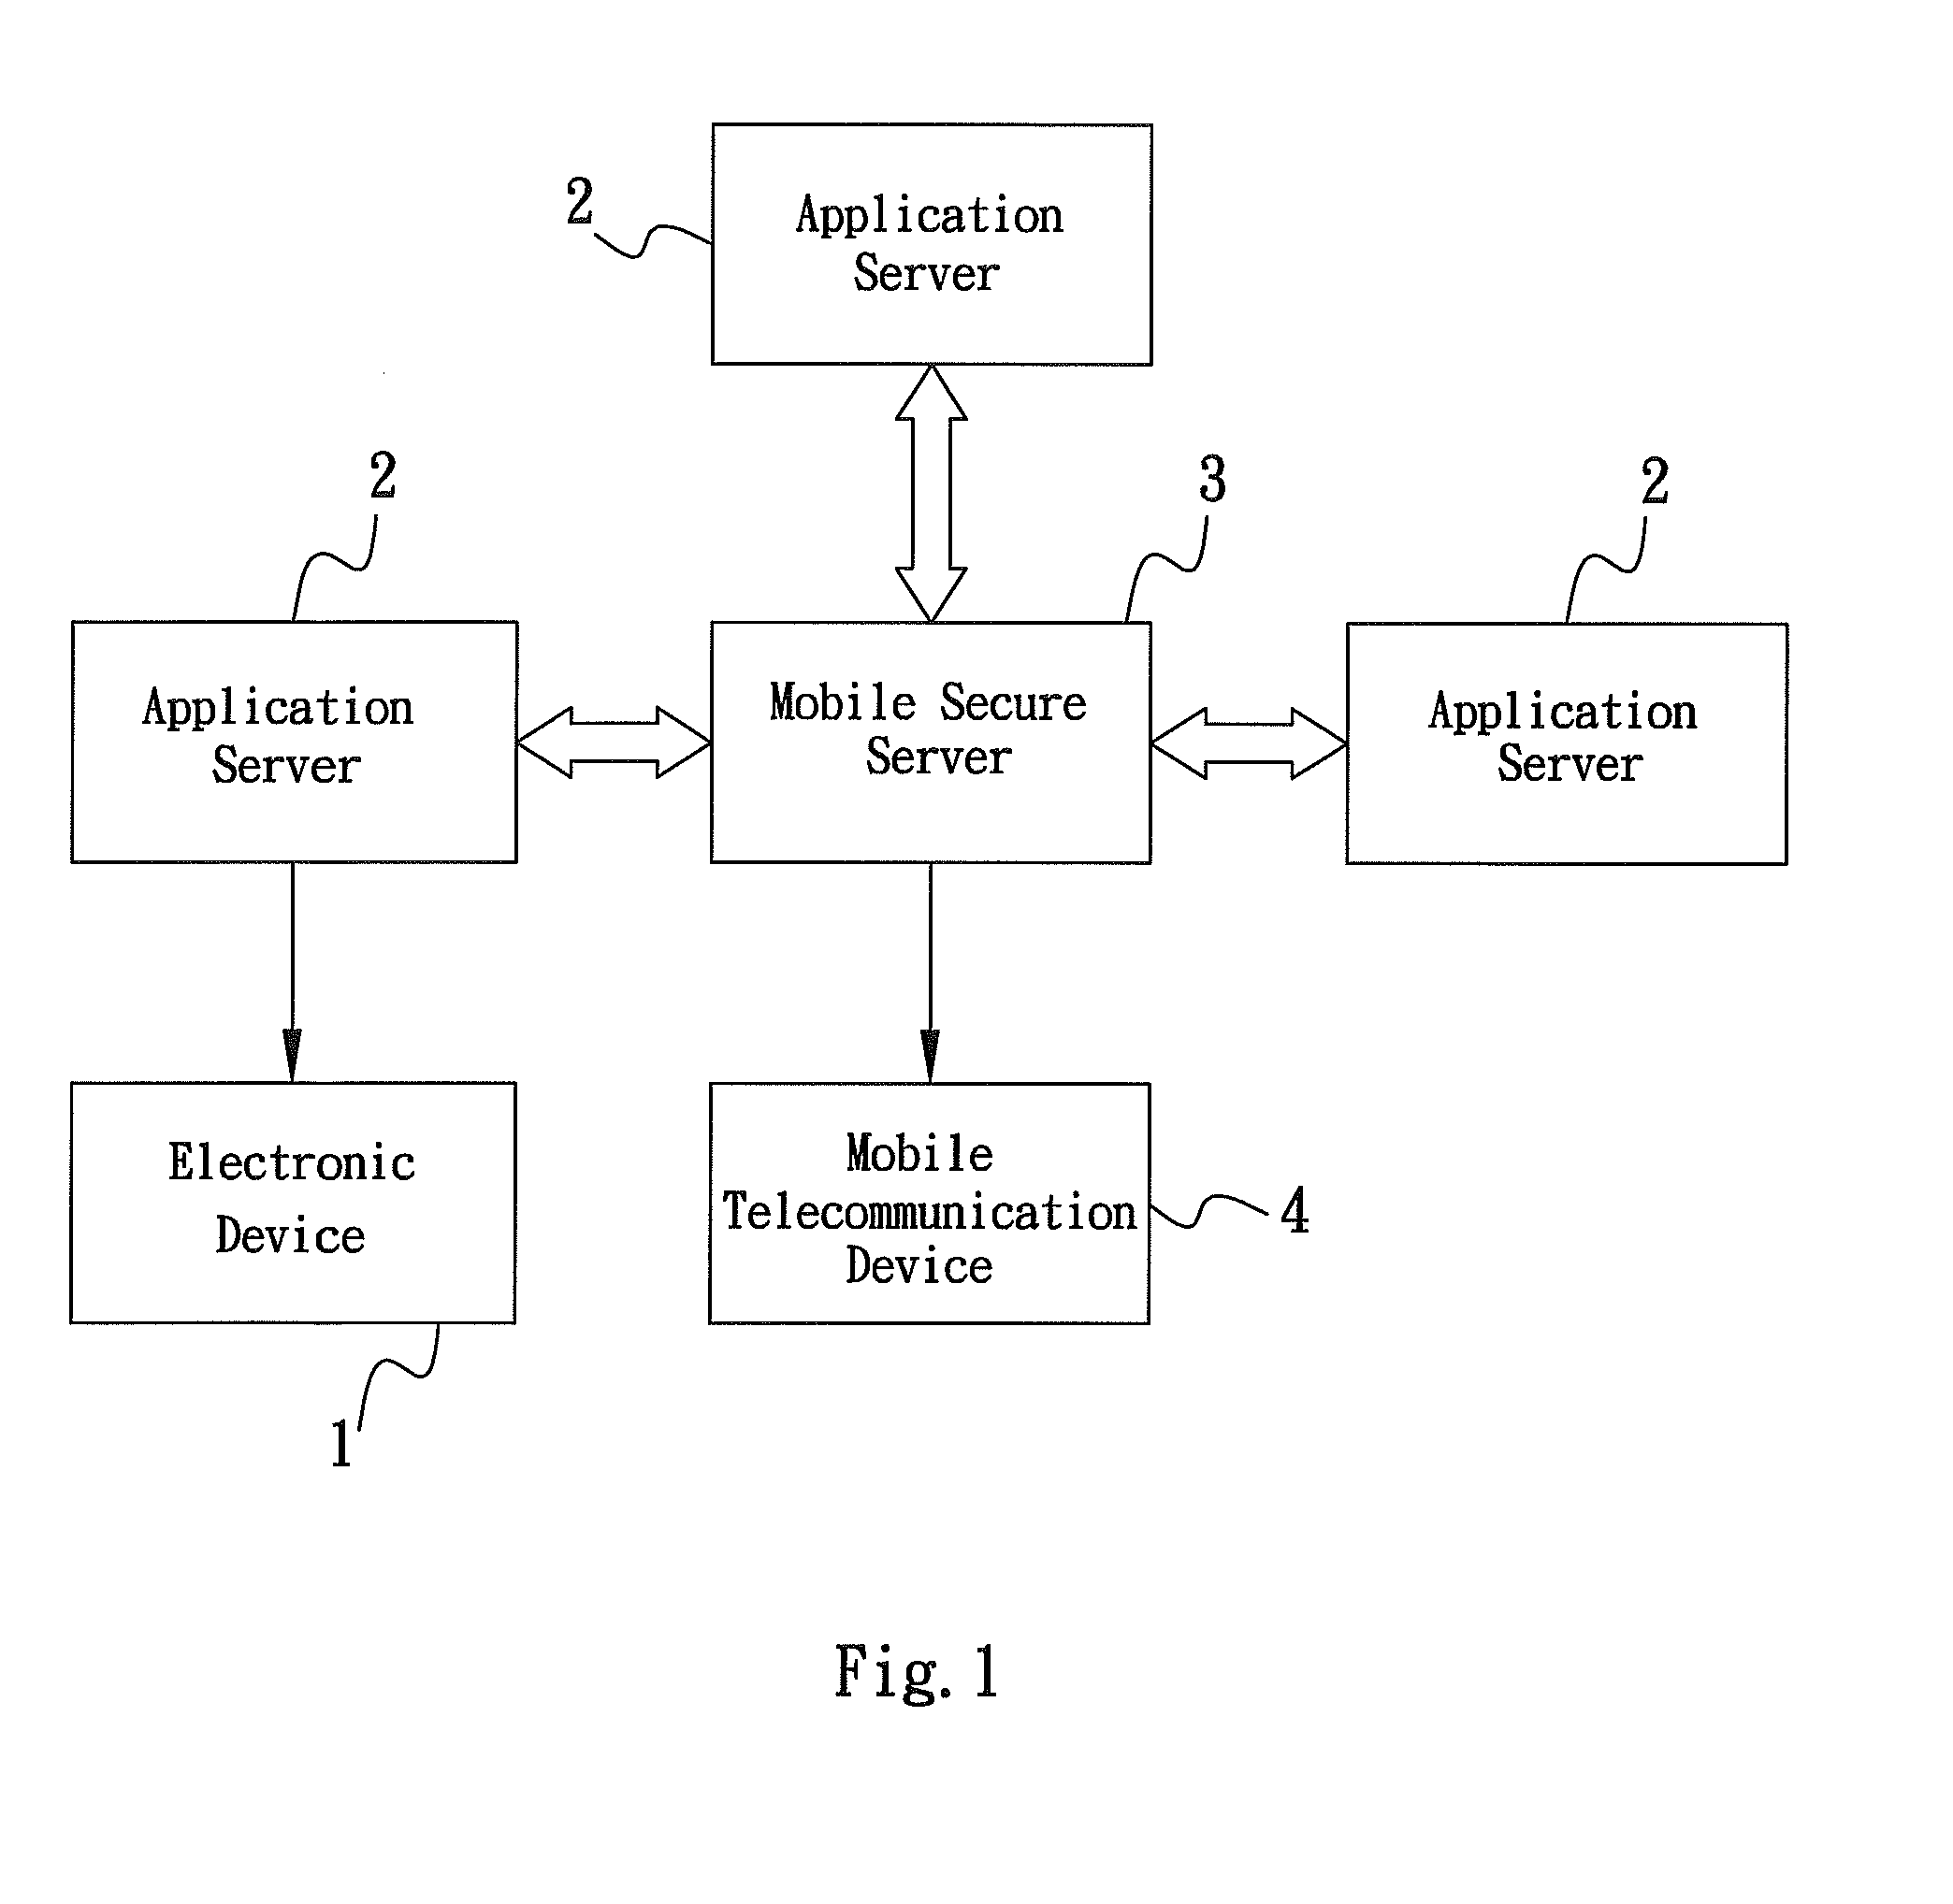 Method of authenticating, authorizing, encrypting and decrypting via mobile service